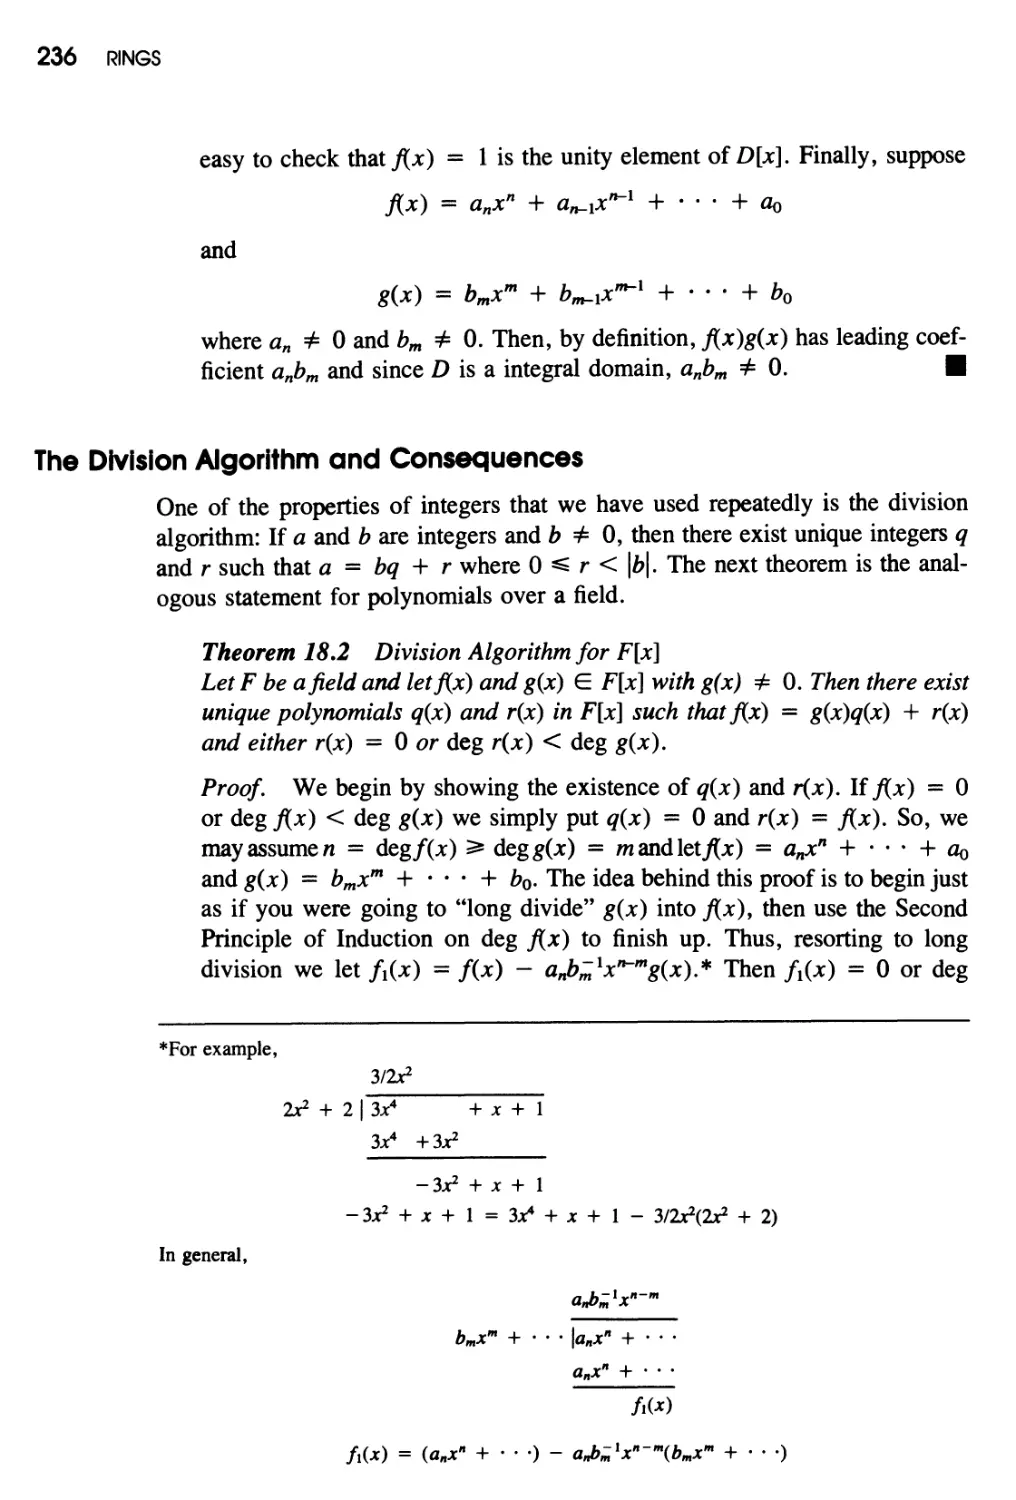 The Division Algorithm and Consequences